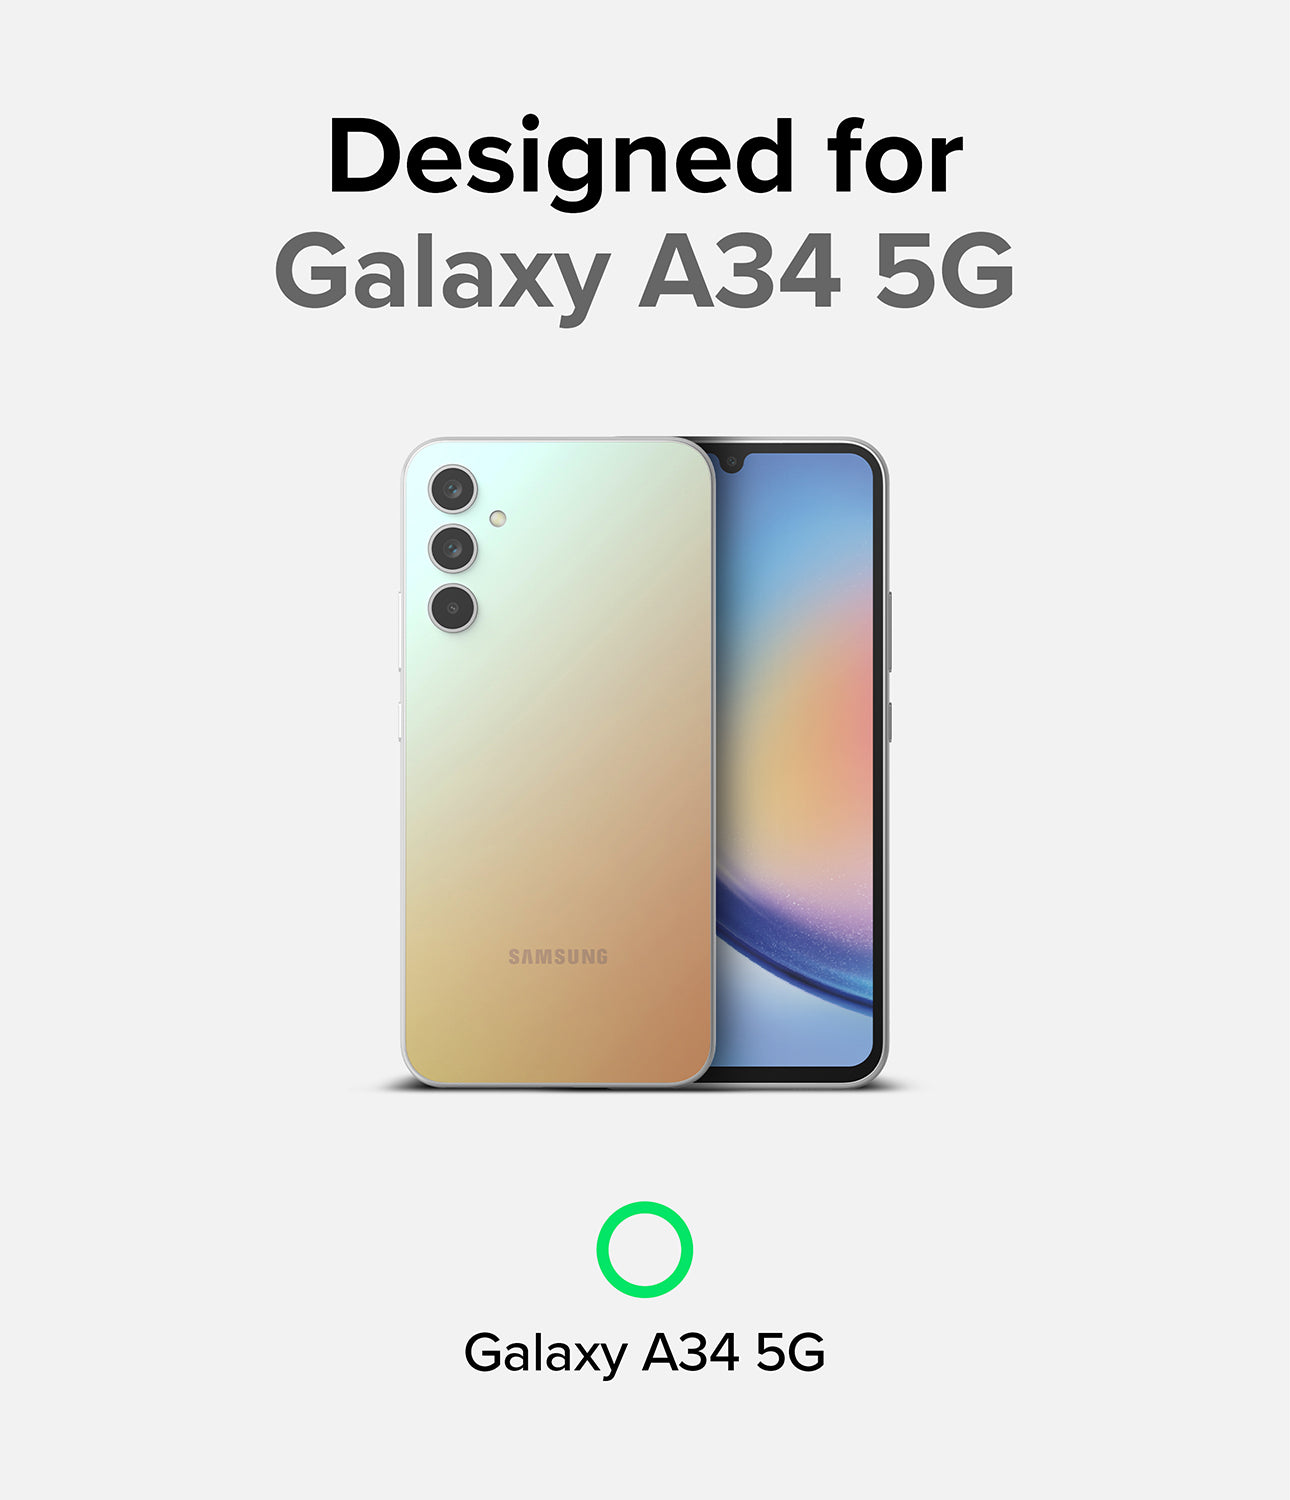 Designed for Galaxy A34 5G